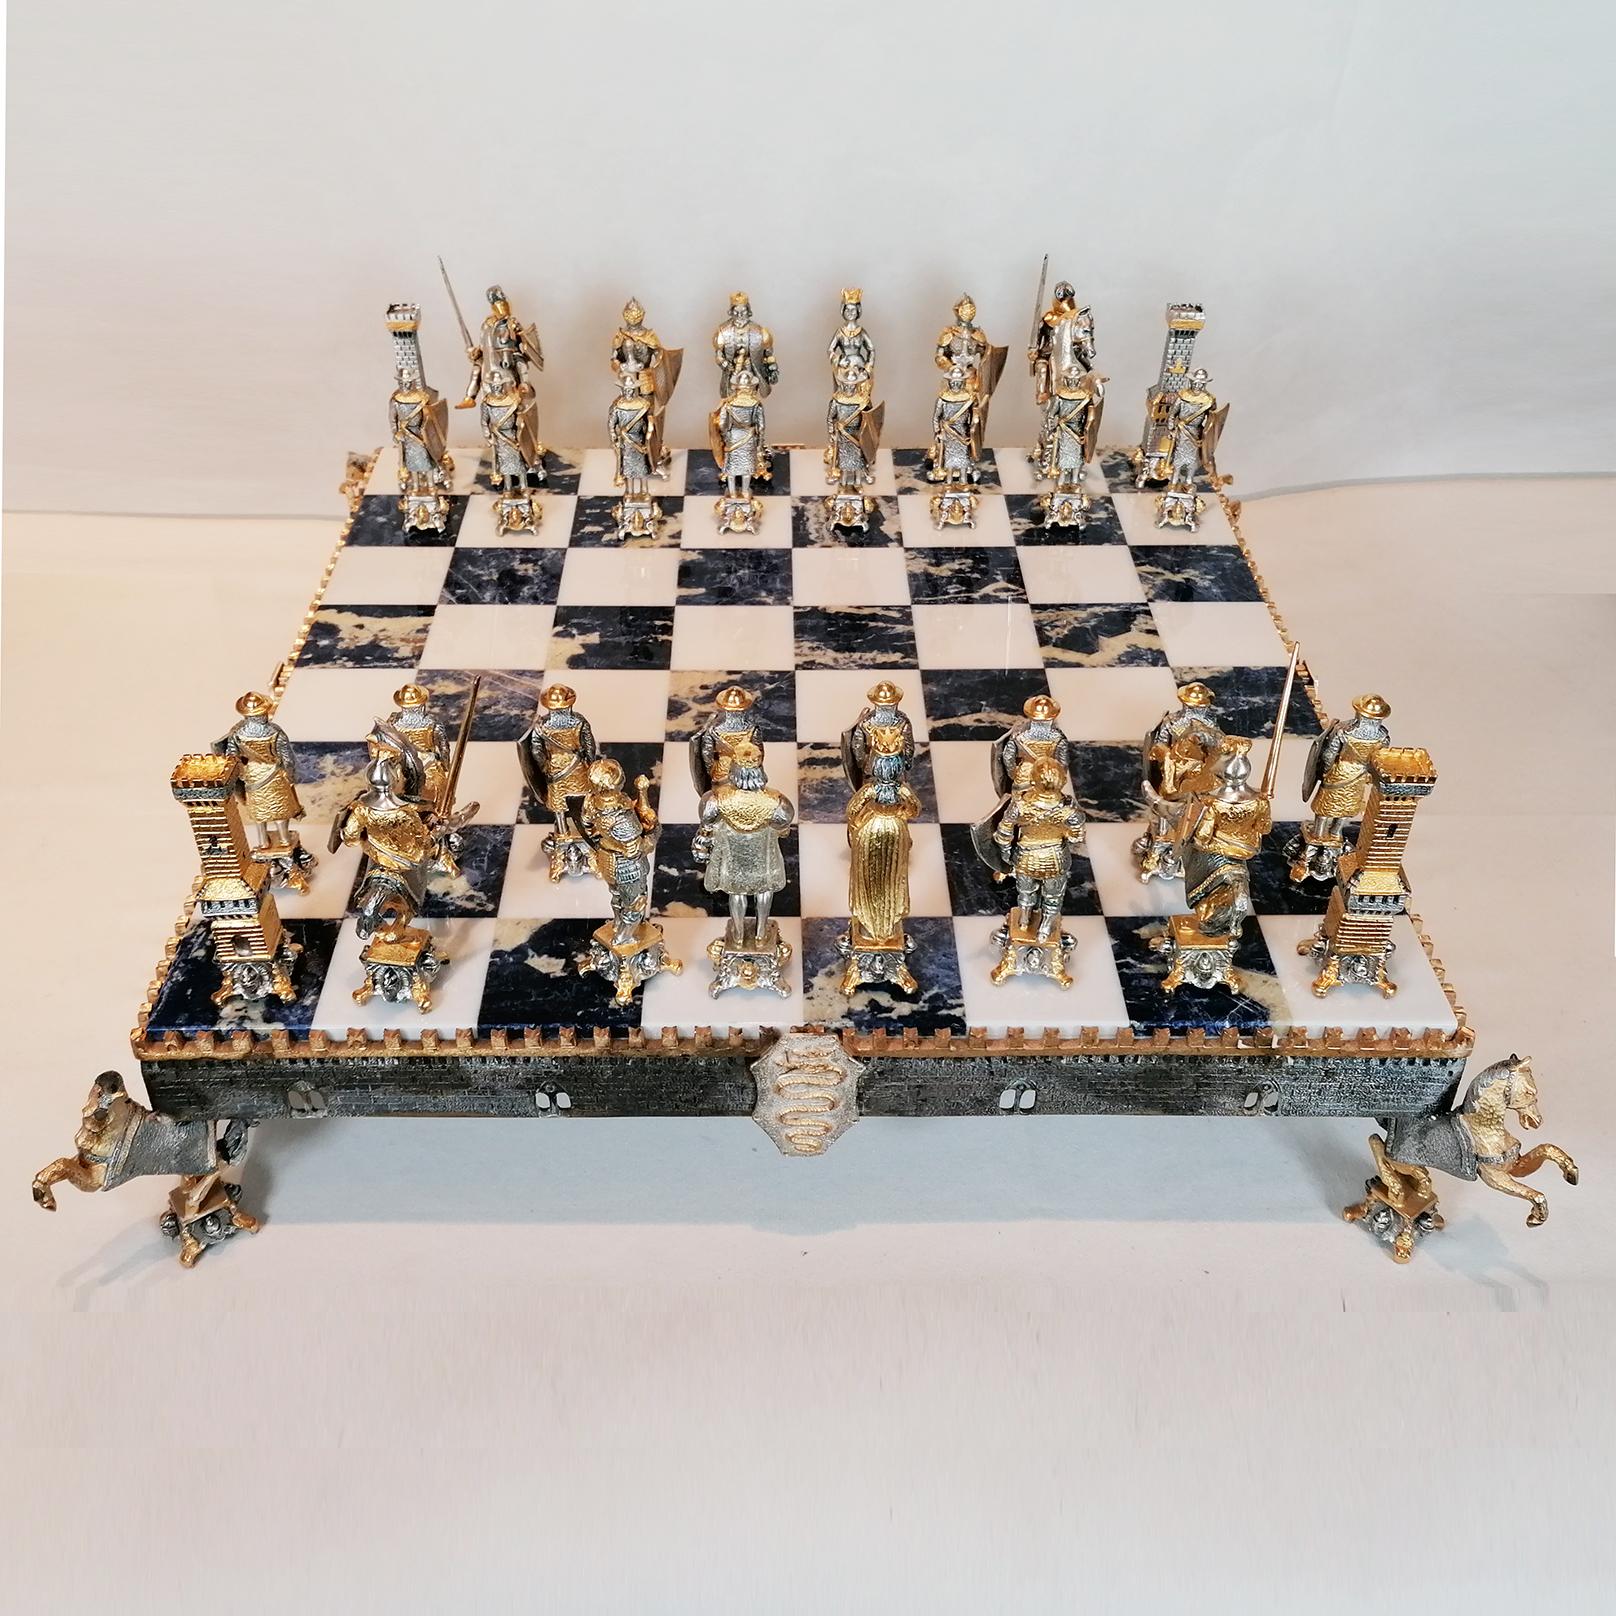 Impressive sterling silver chess board medieval style chess set.
The chess board, made by ARVAL ARGENTI VALENZA, was made in white marble and sodalite is supported by a STERLING SILVER frame made with the casting method and finished with a chisel,